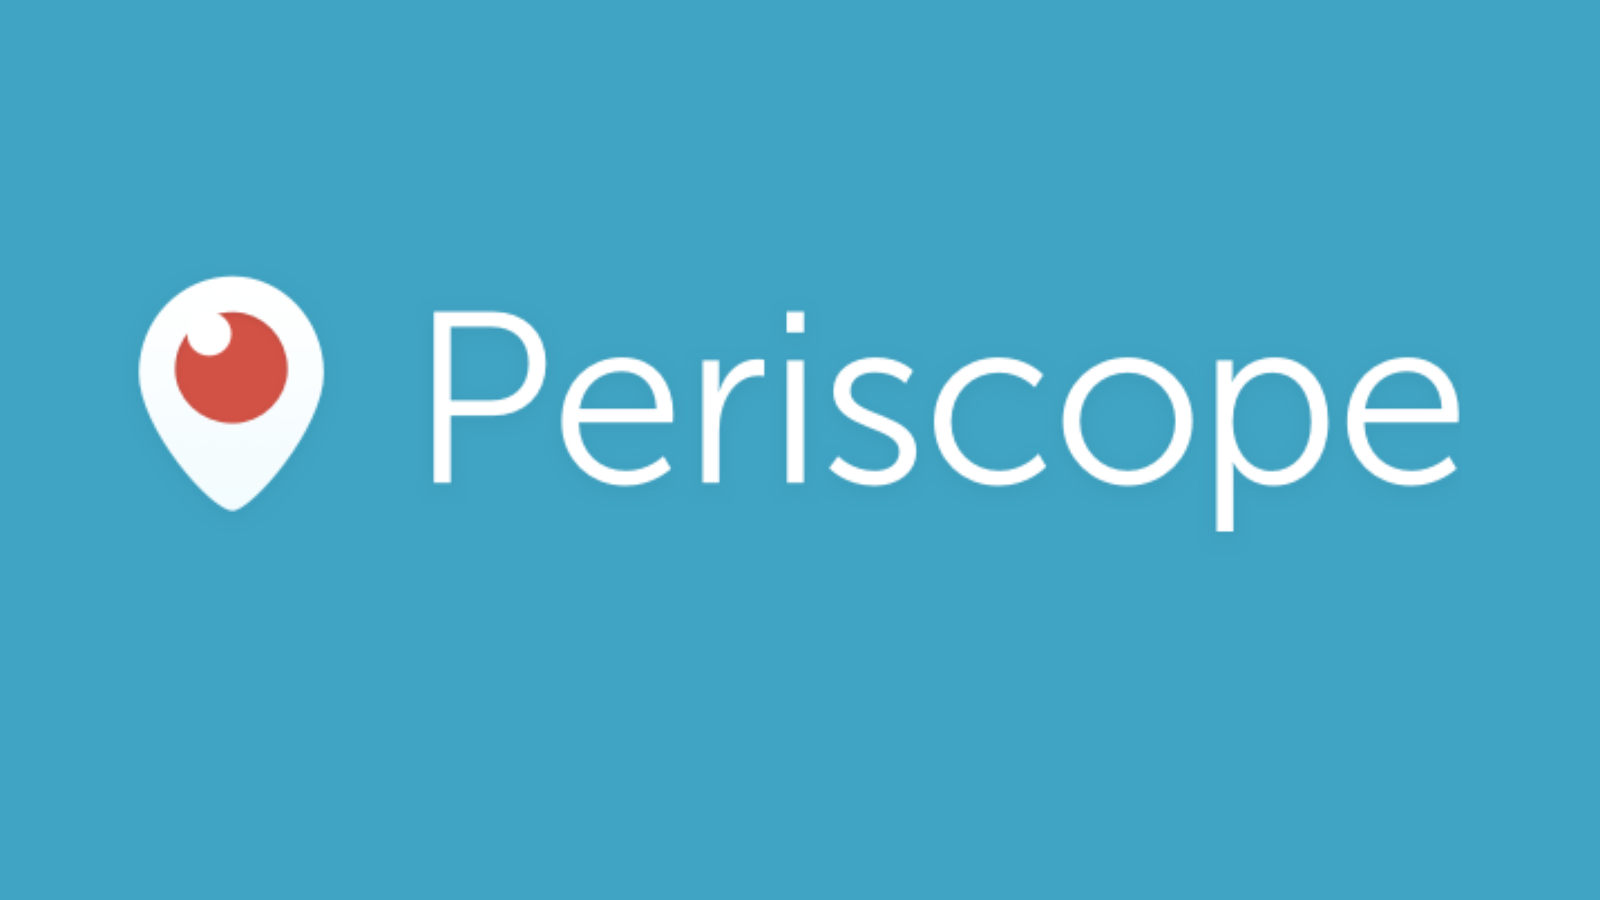 Get used to seeing this logo. Periscope will soon be a major player in the social media world.